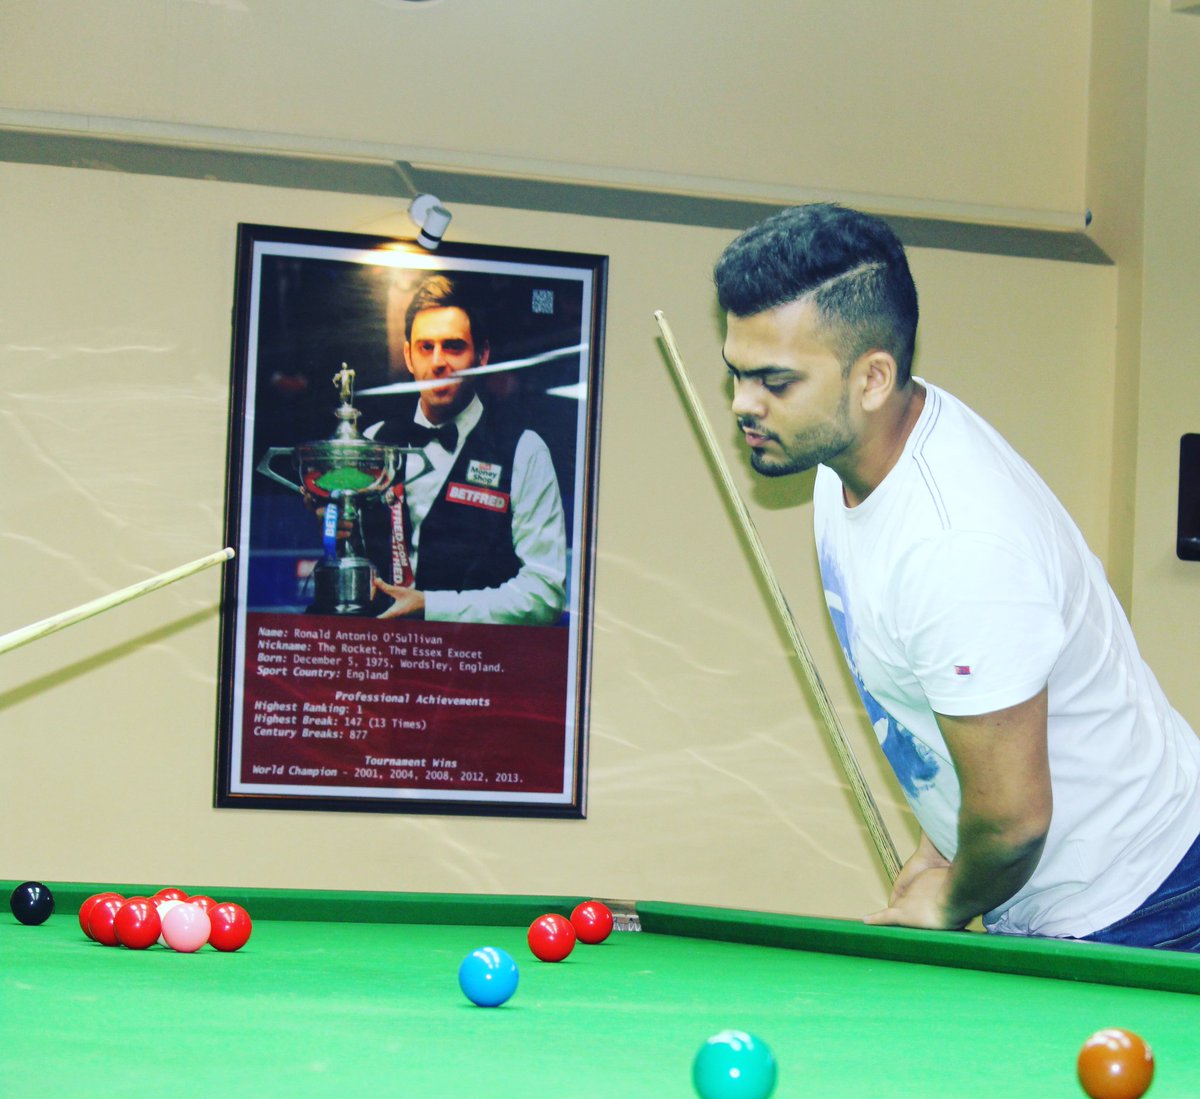 Kuch to gadbad hai..?? 🤔
Where is the cue ball..? 
#OMx777 #snooker #snookerlove #therocketfan #omincues #beinghumanclothing instagram.com/p/BlL1eSIgkqa/…
@ronnieo147